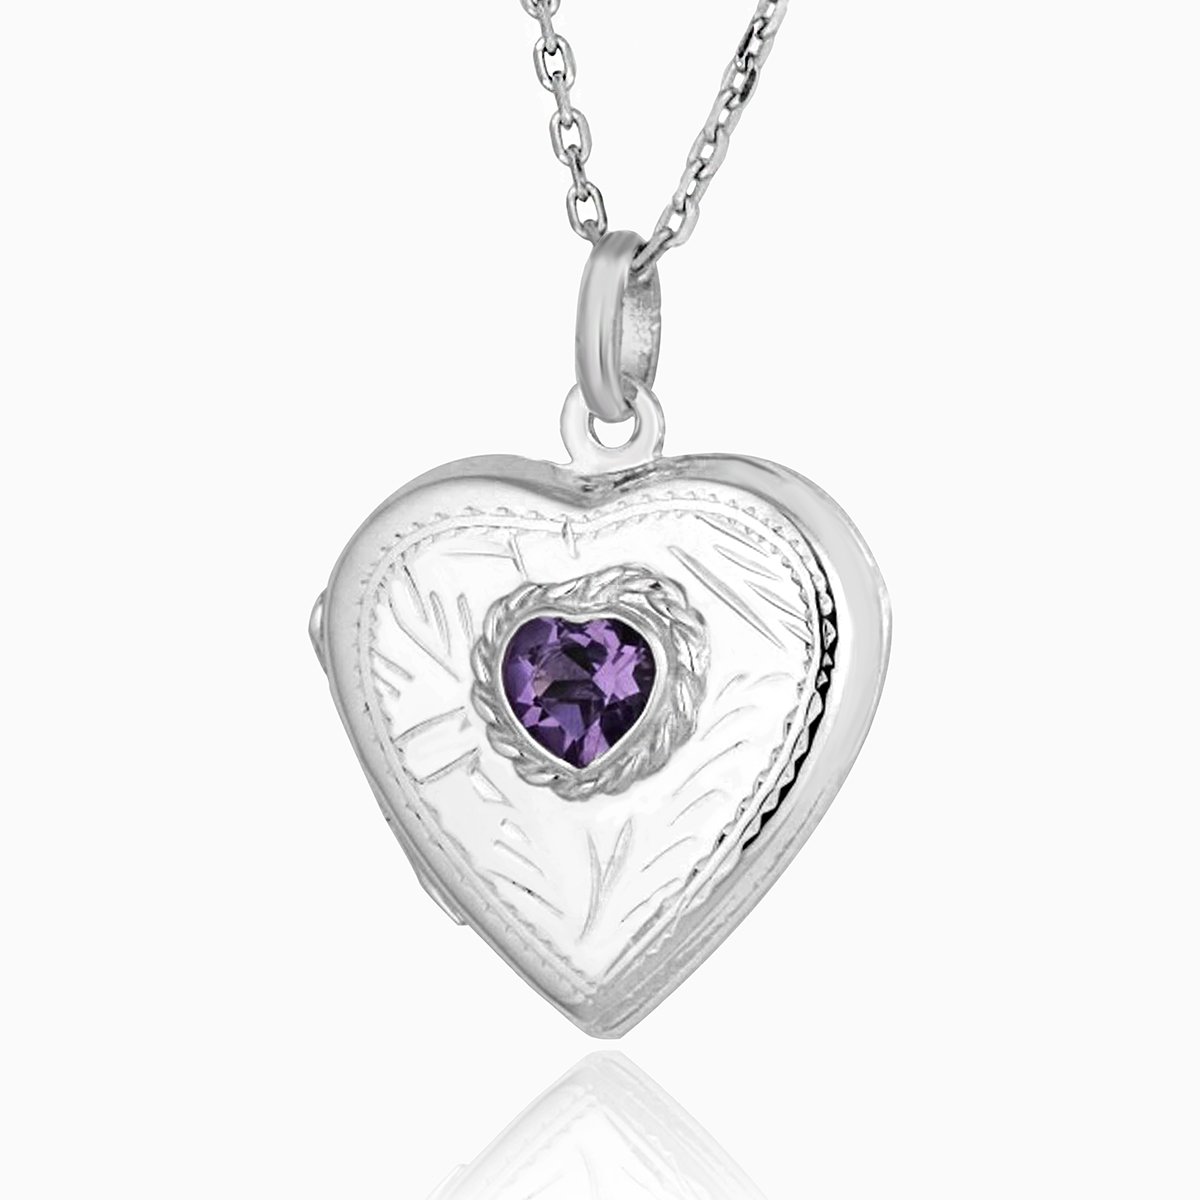 925 sterling silver engraved heart locket with amethyst stone